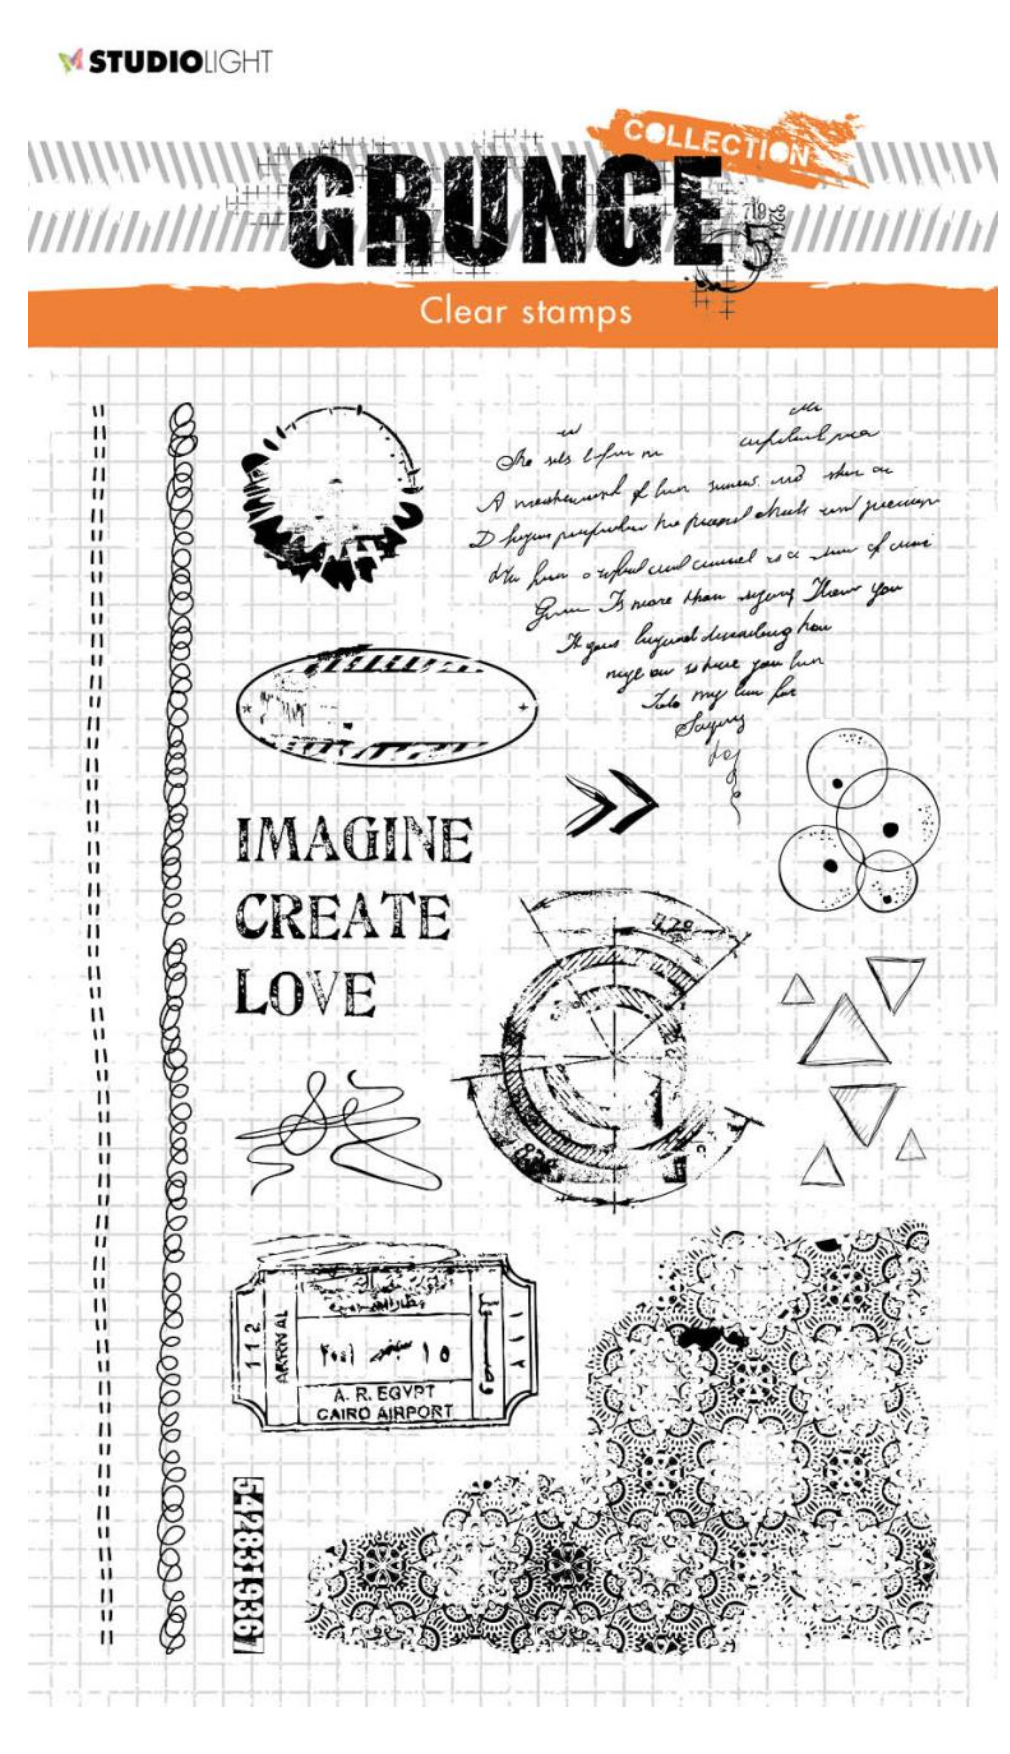 Studio Light Grunge - Clear Stamp Elements Love Grunge Collection 210x148x3mm 13 PC Nr.206 - Messy Papercrafts